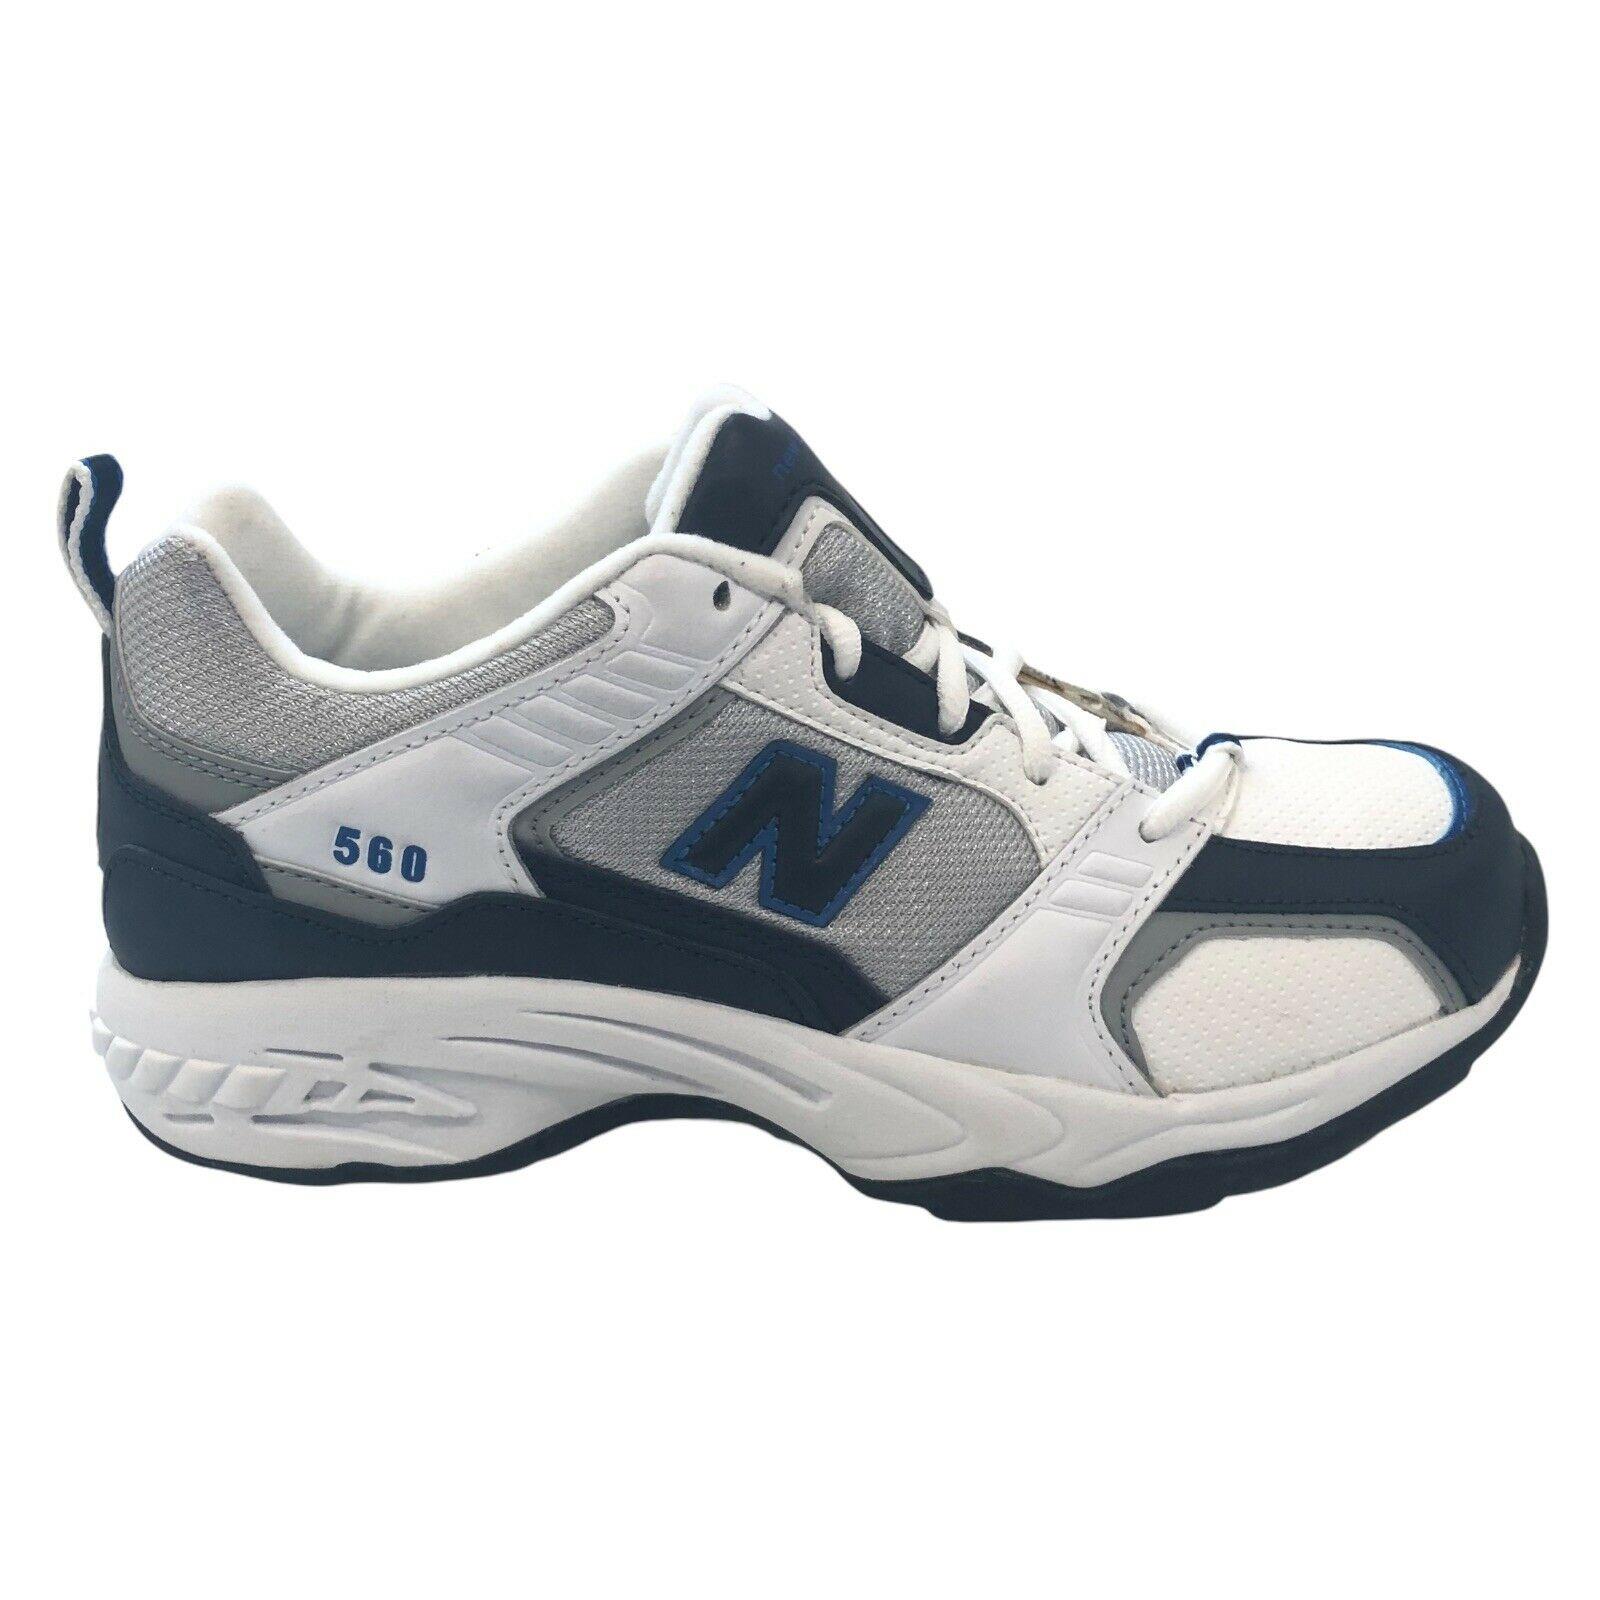 Vintage New Balance 560 Running Shoes Mens Size 6 White Navy KX560A1G